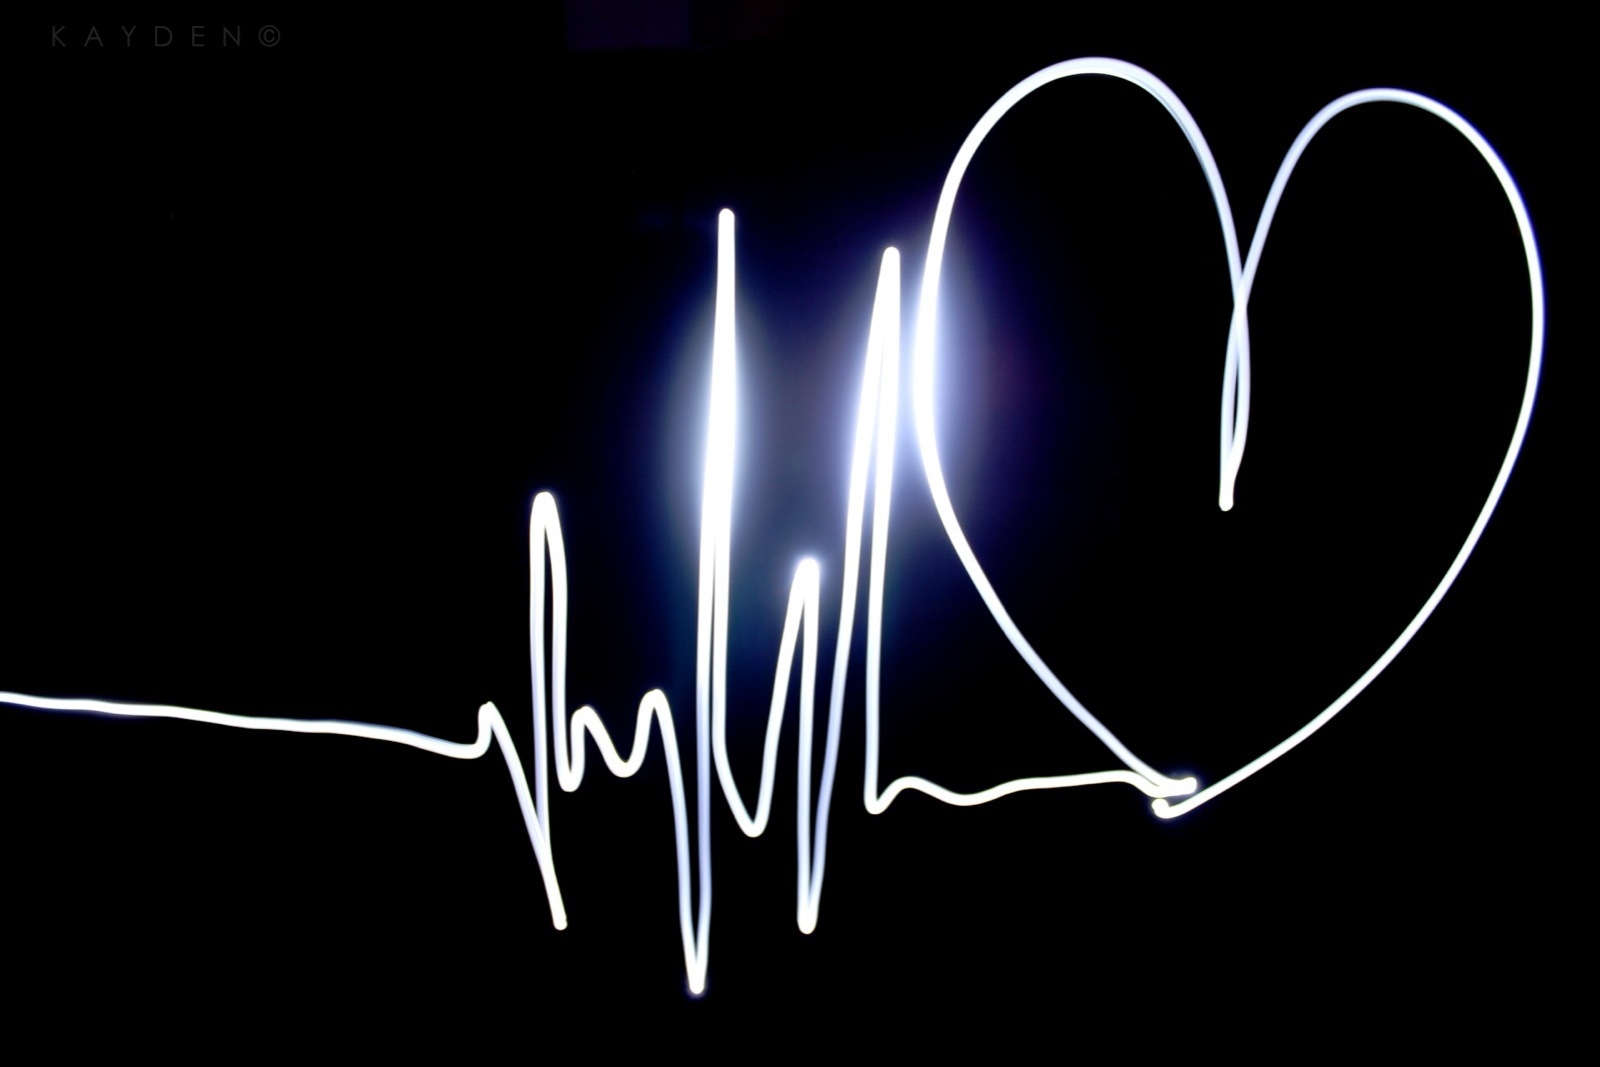 Heart Shape Made From Pulse Trace On Black Background